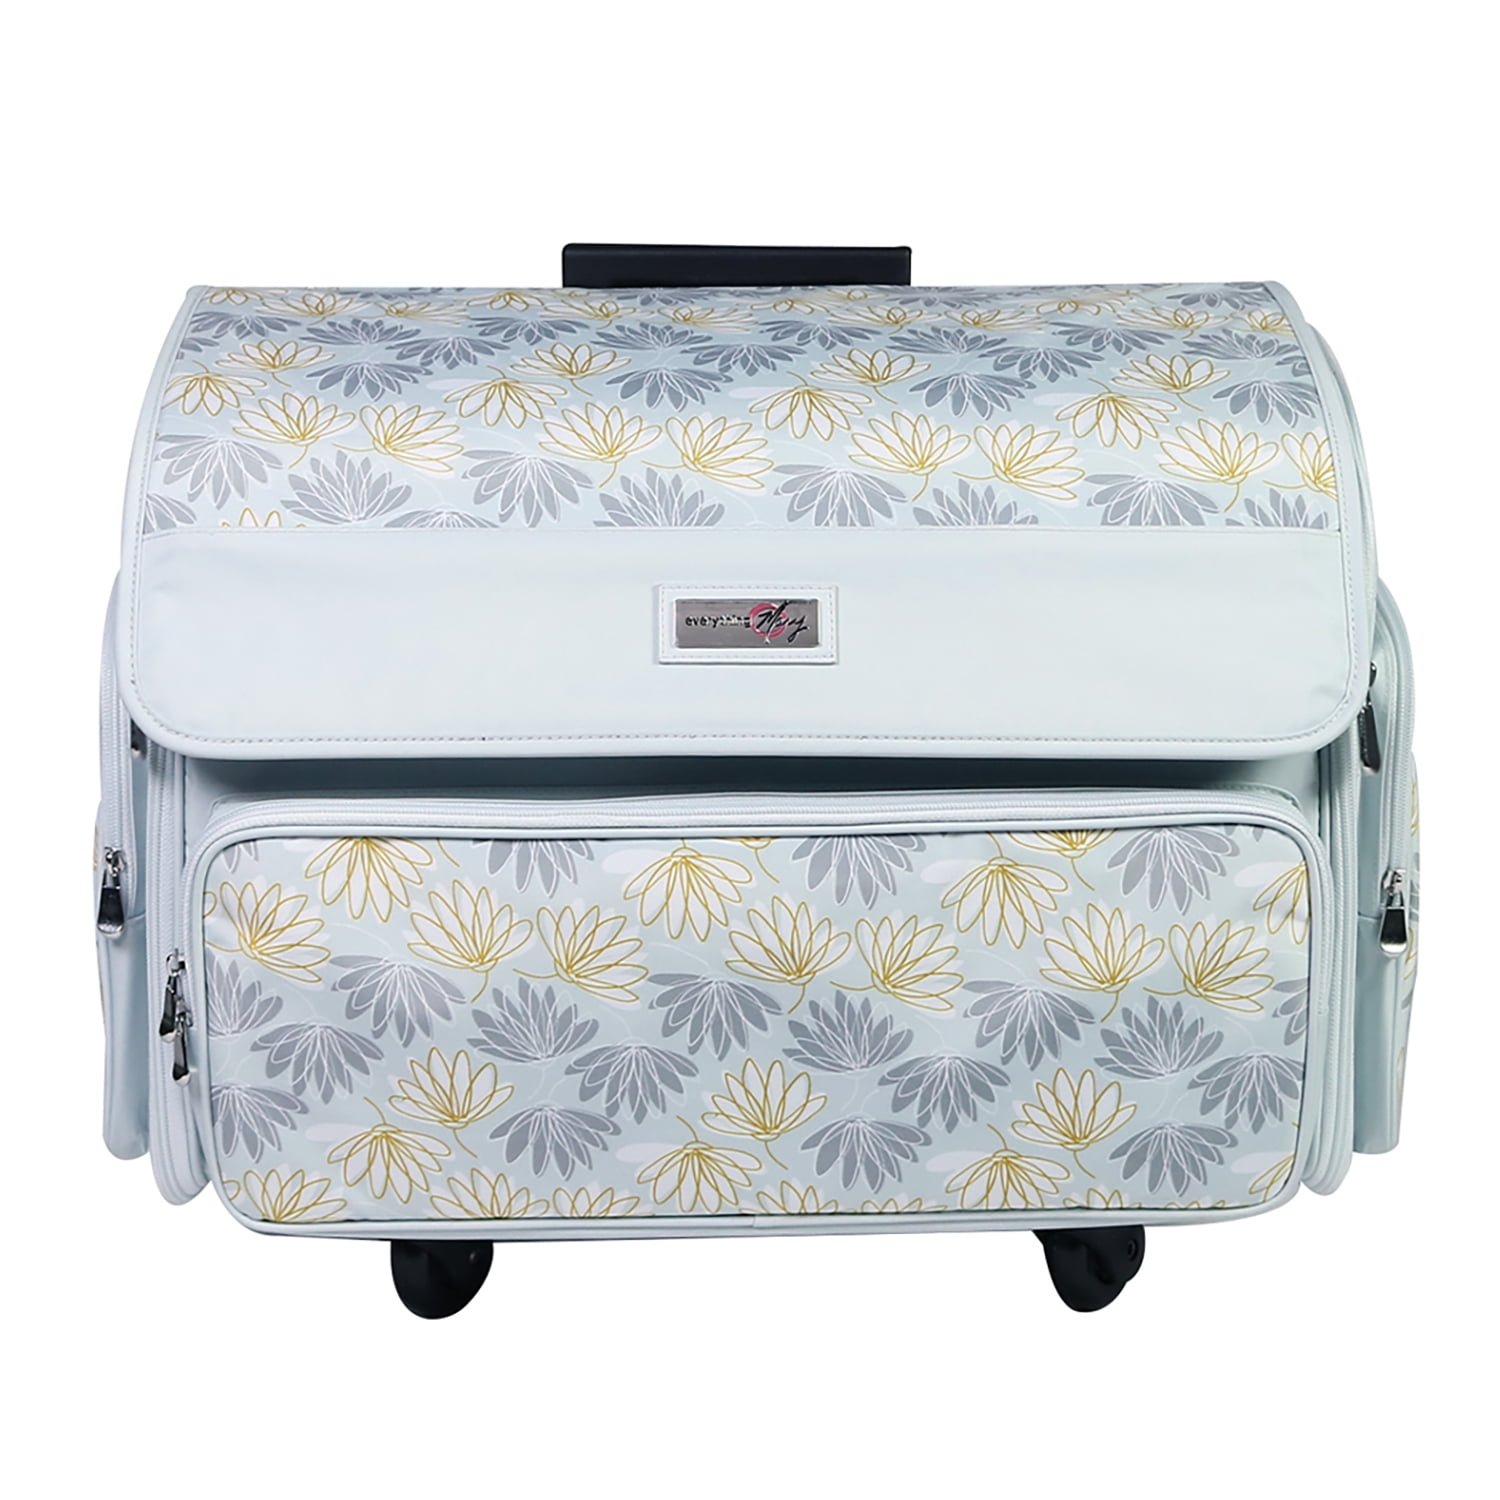 Everything Mary Collapsible Serger Machine Rolling Storage Case, Black Floral - Carrying Bag for Overlock Machines - for